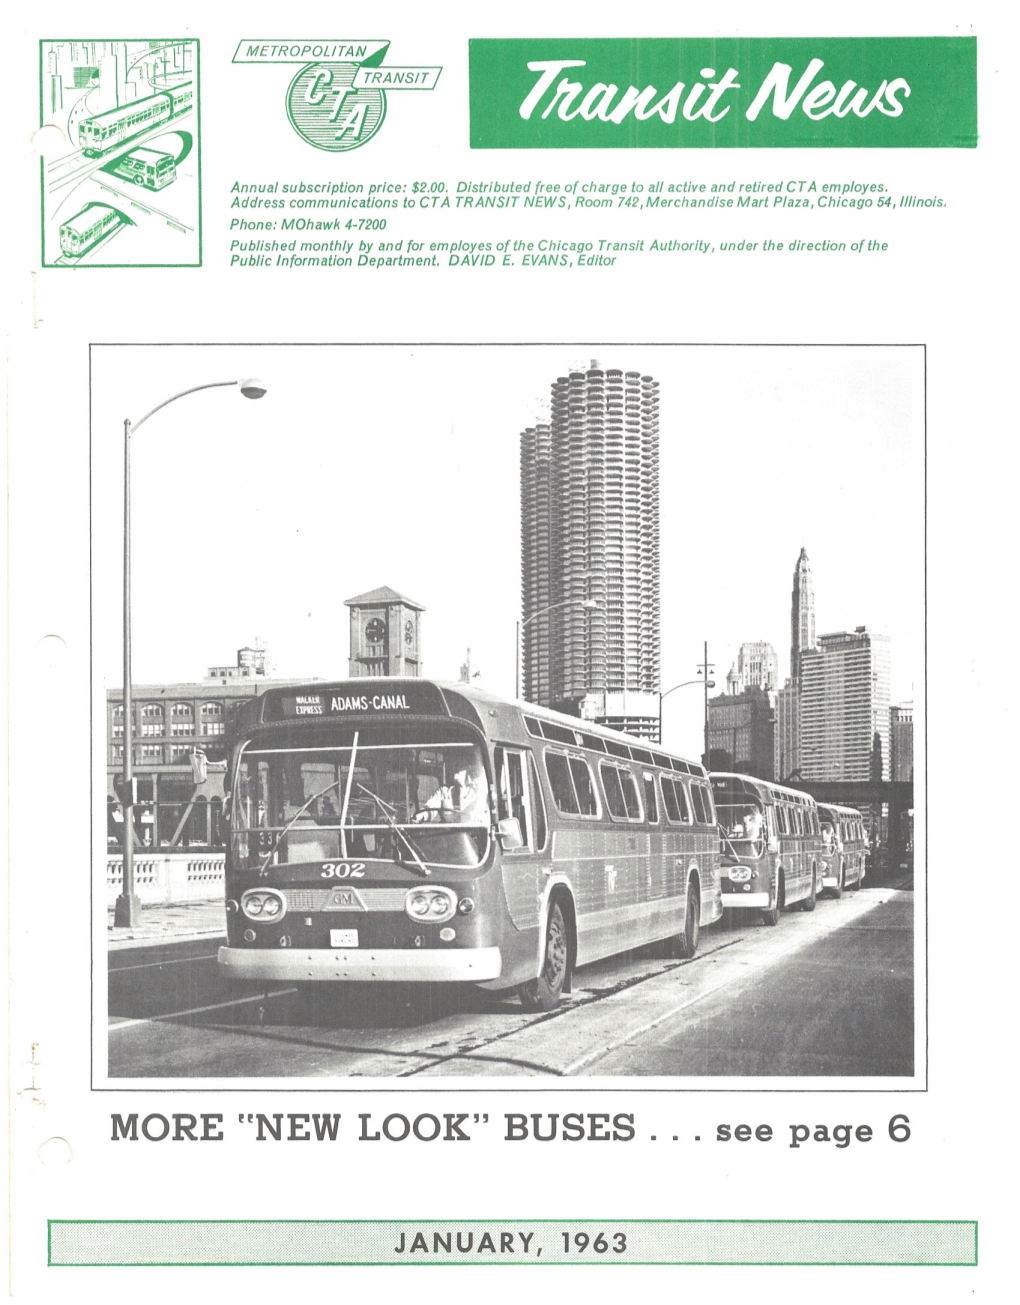 MORE Ffnew LOOK" BUSES ... See Page 6 TRANSIT NEWS -2- JANUARY 1963